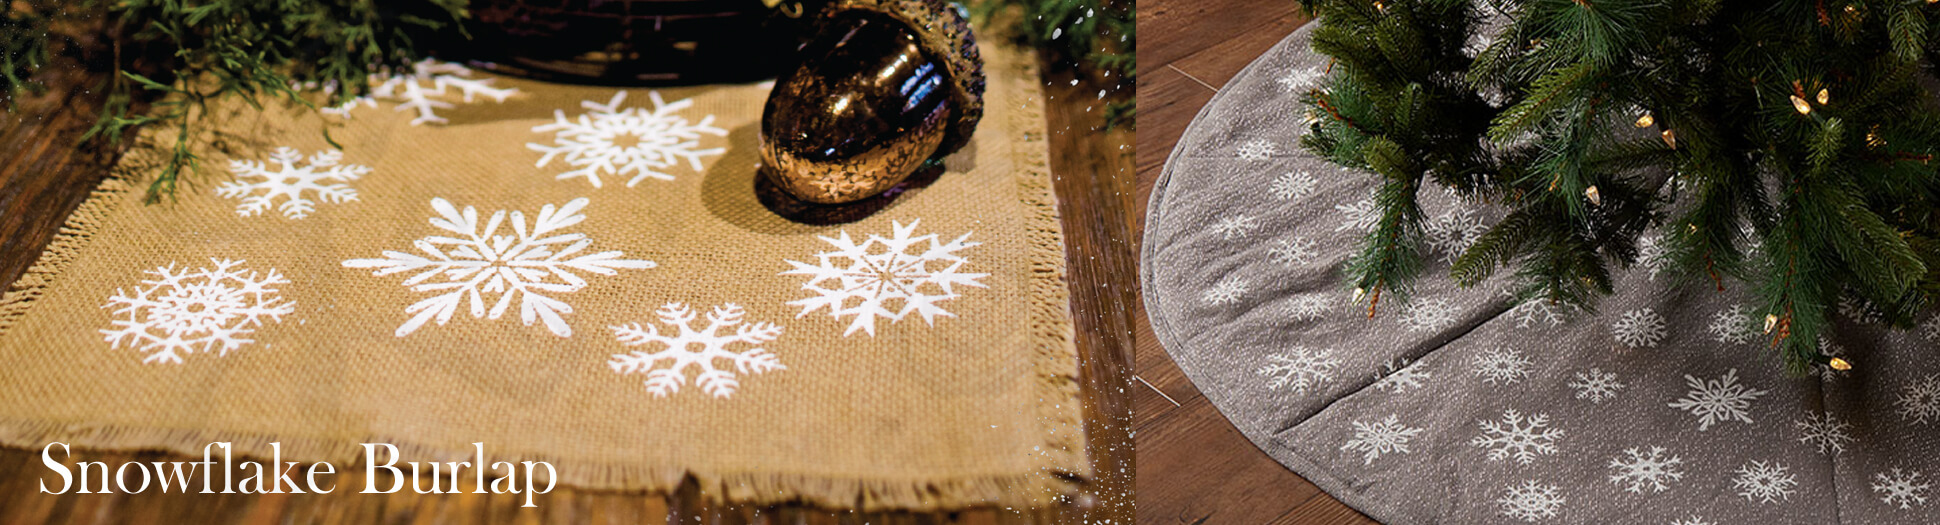  Snowflake Burlap Holiday Decor from VHC Brands 